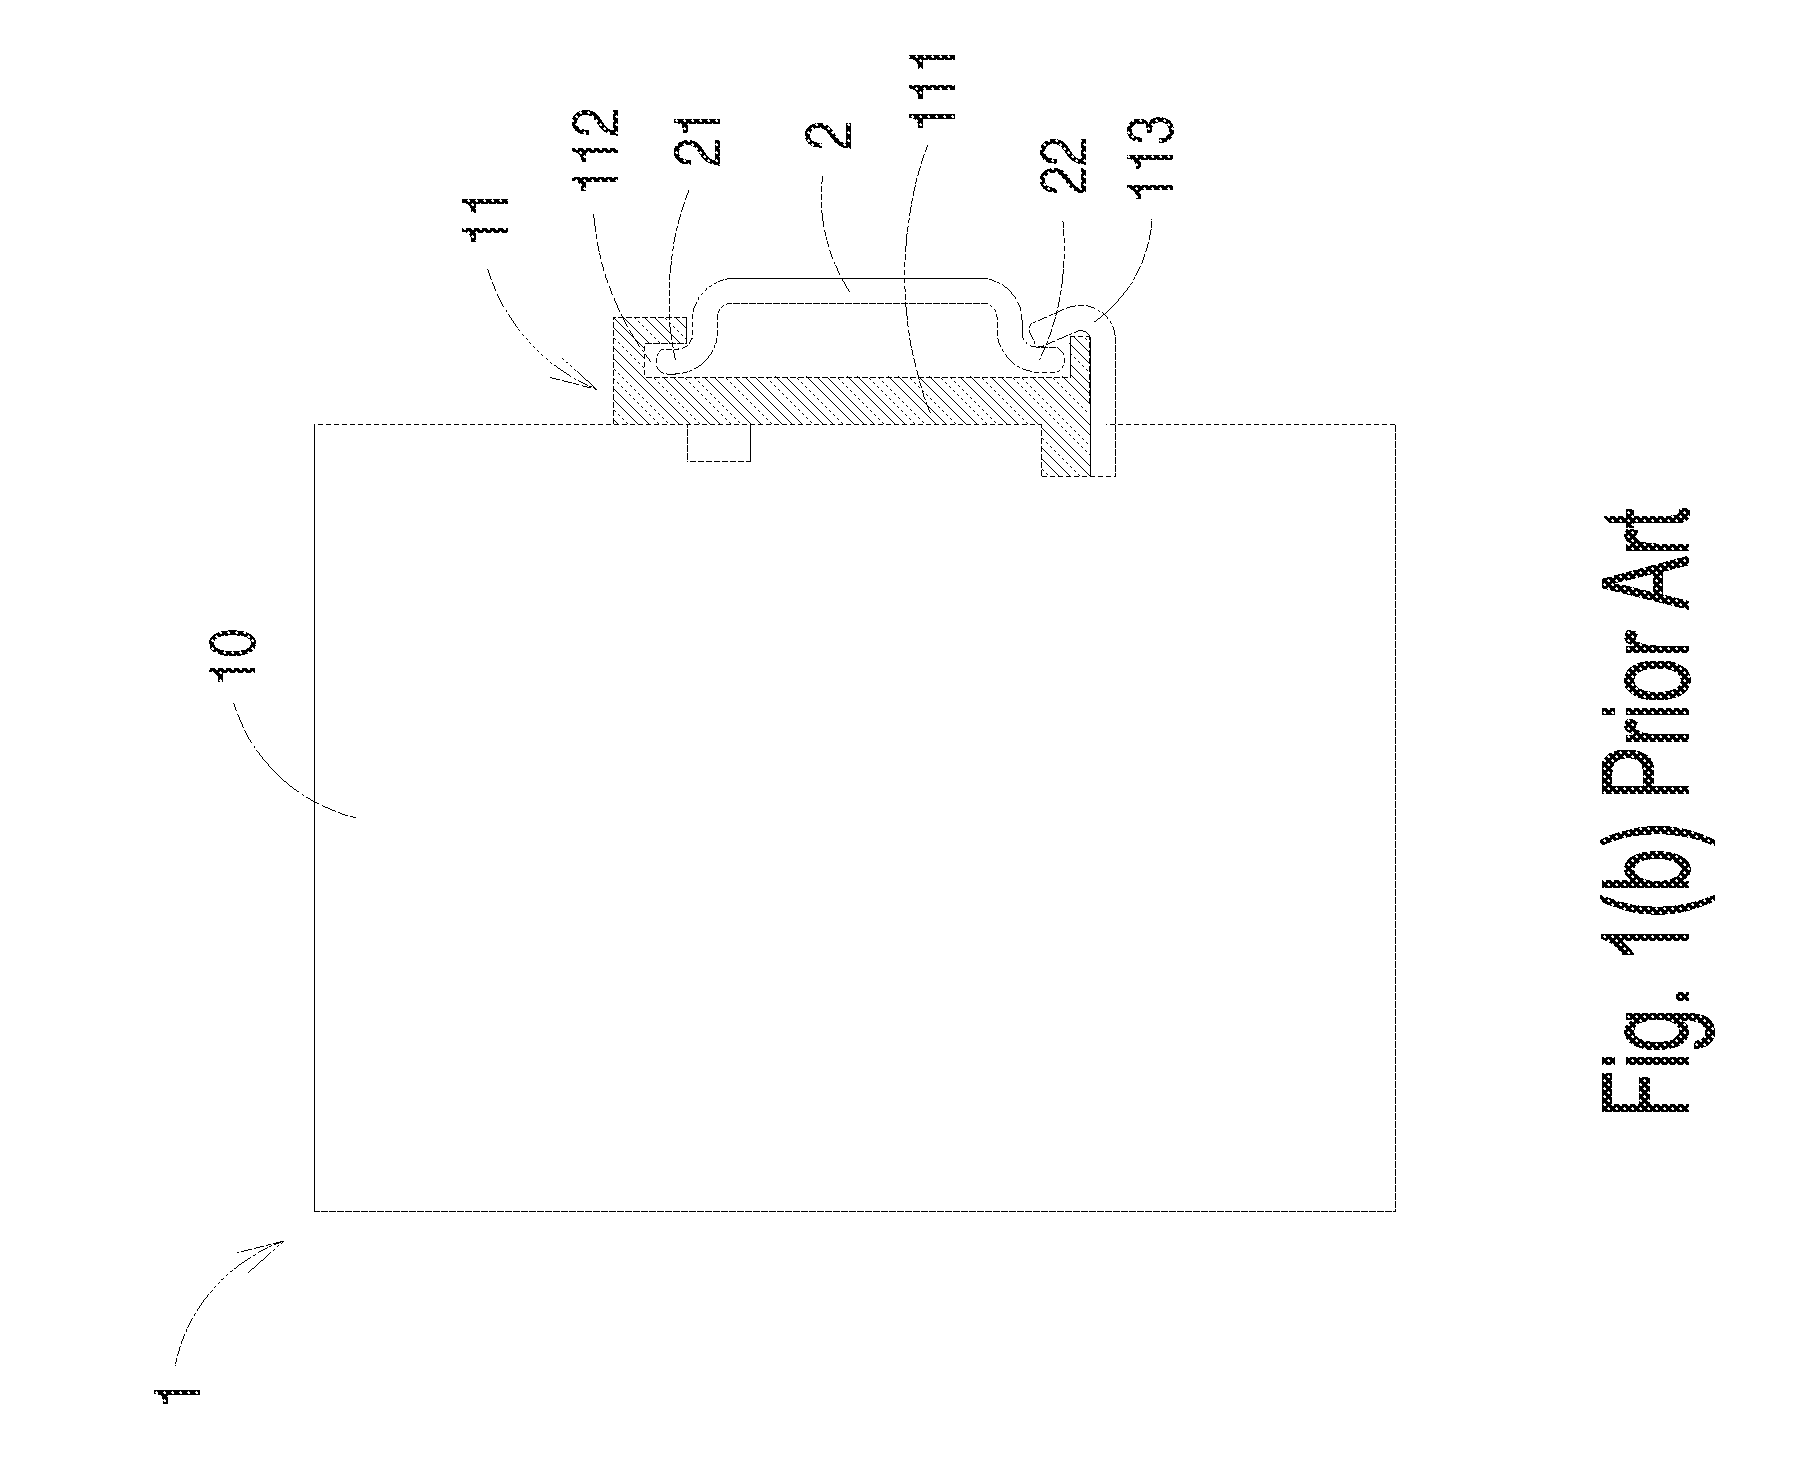 Mechanism of fastening detachable electronic device to din rail